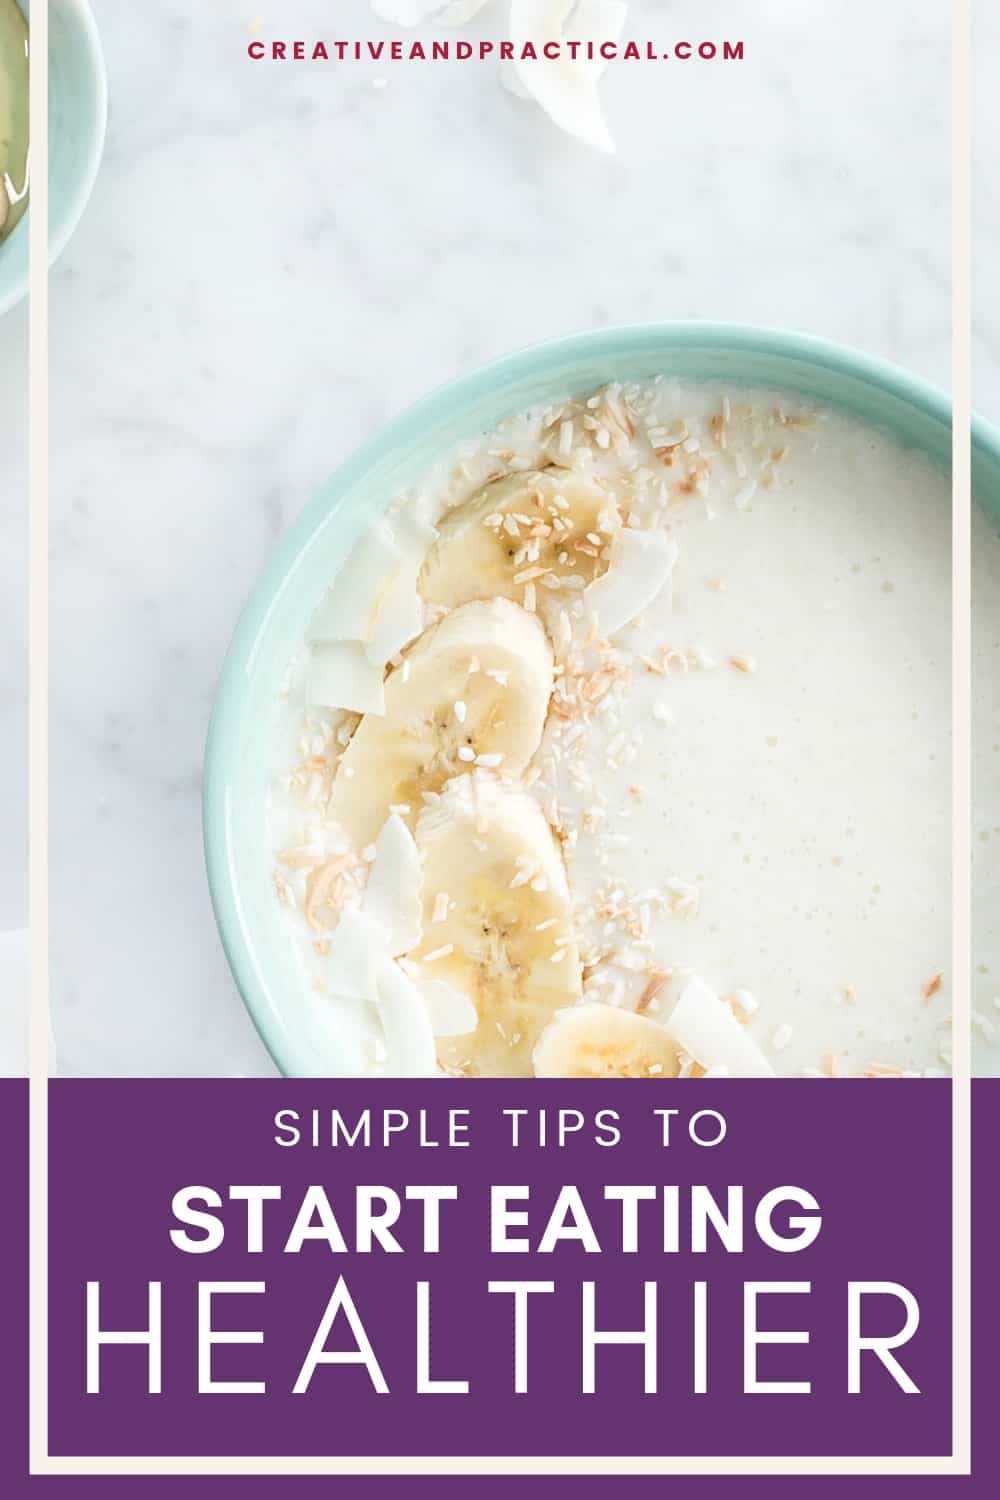 If you want to start to eat healthier, but feel overwhelmed, these simple tips can help you get off to a great start. #healthyliving #motivation #meals #esyrecipes #nodiet #vegetarian #healthyliving cheerfulcook.com via @cheerfulcook